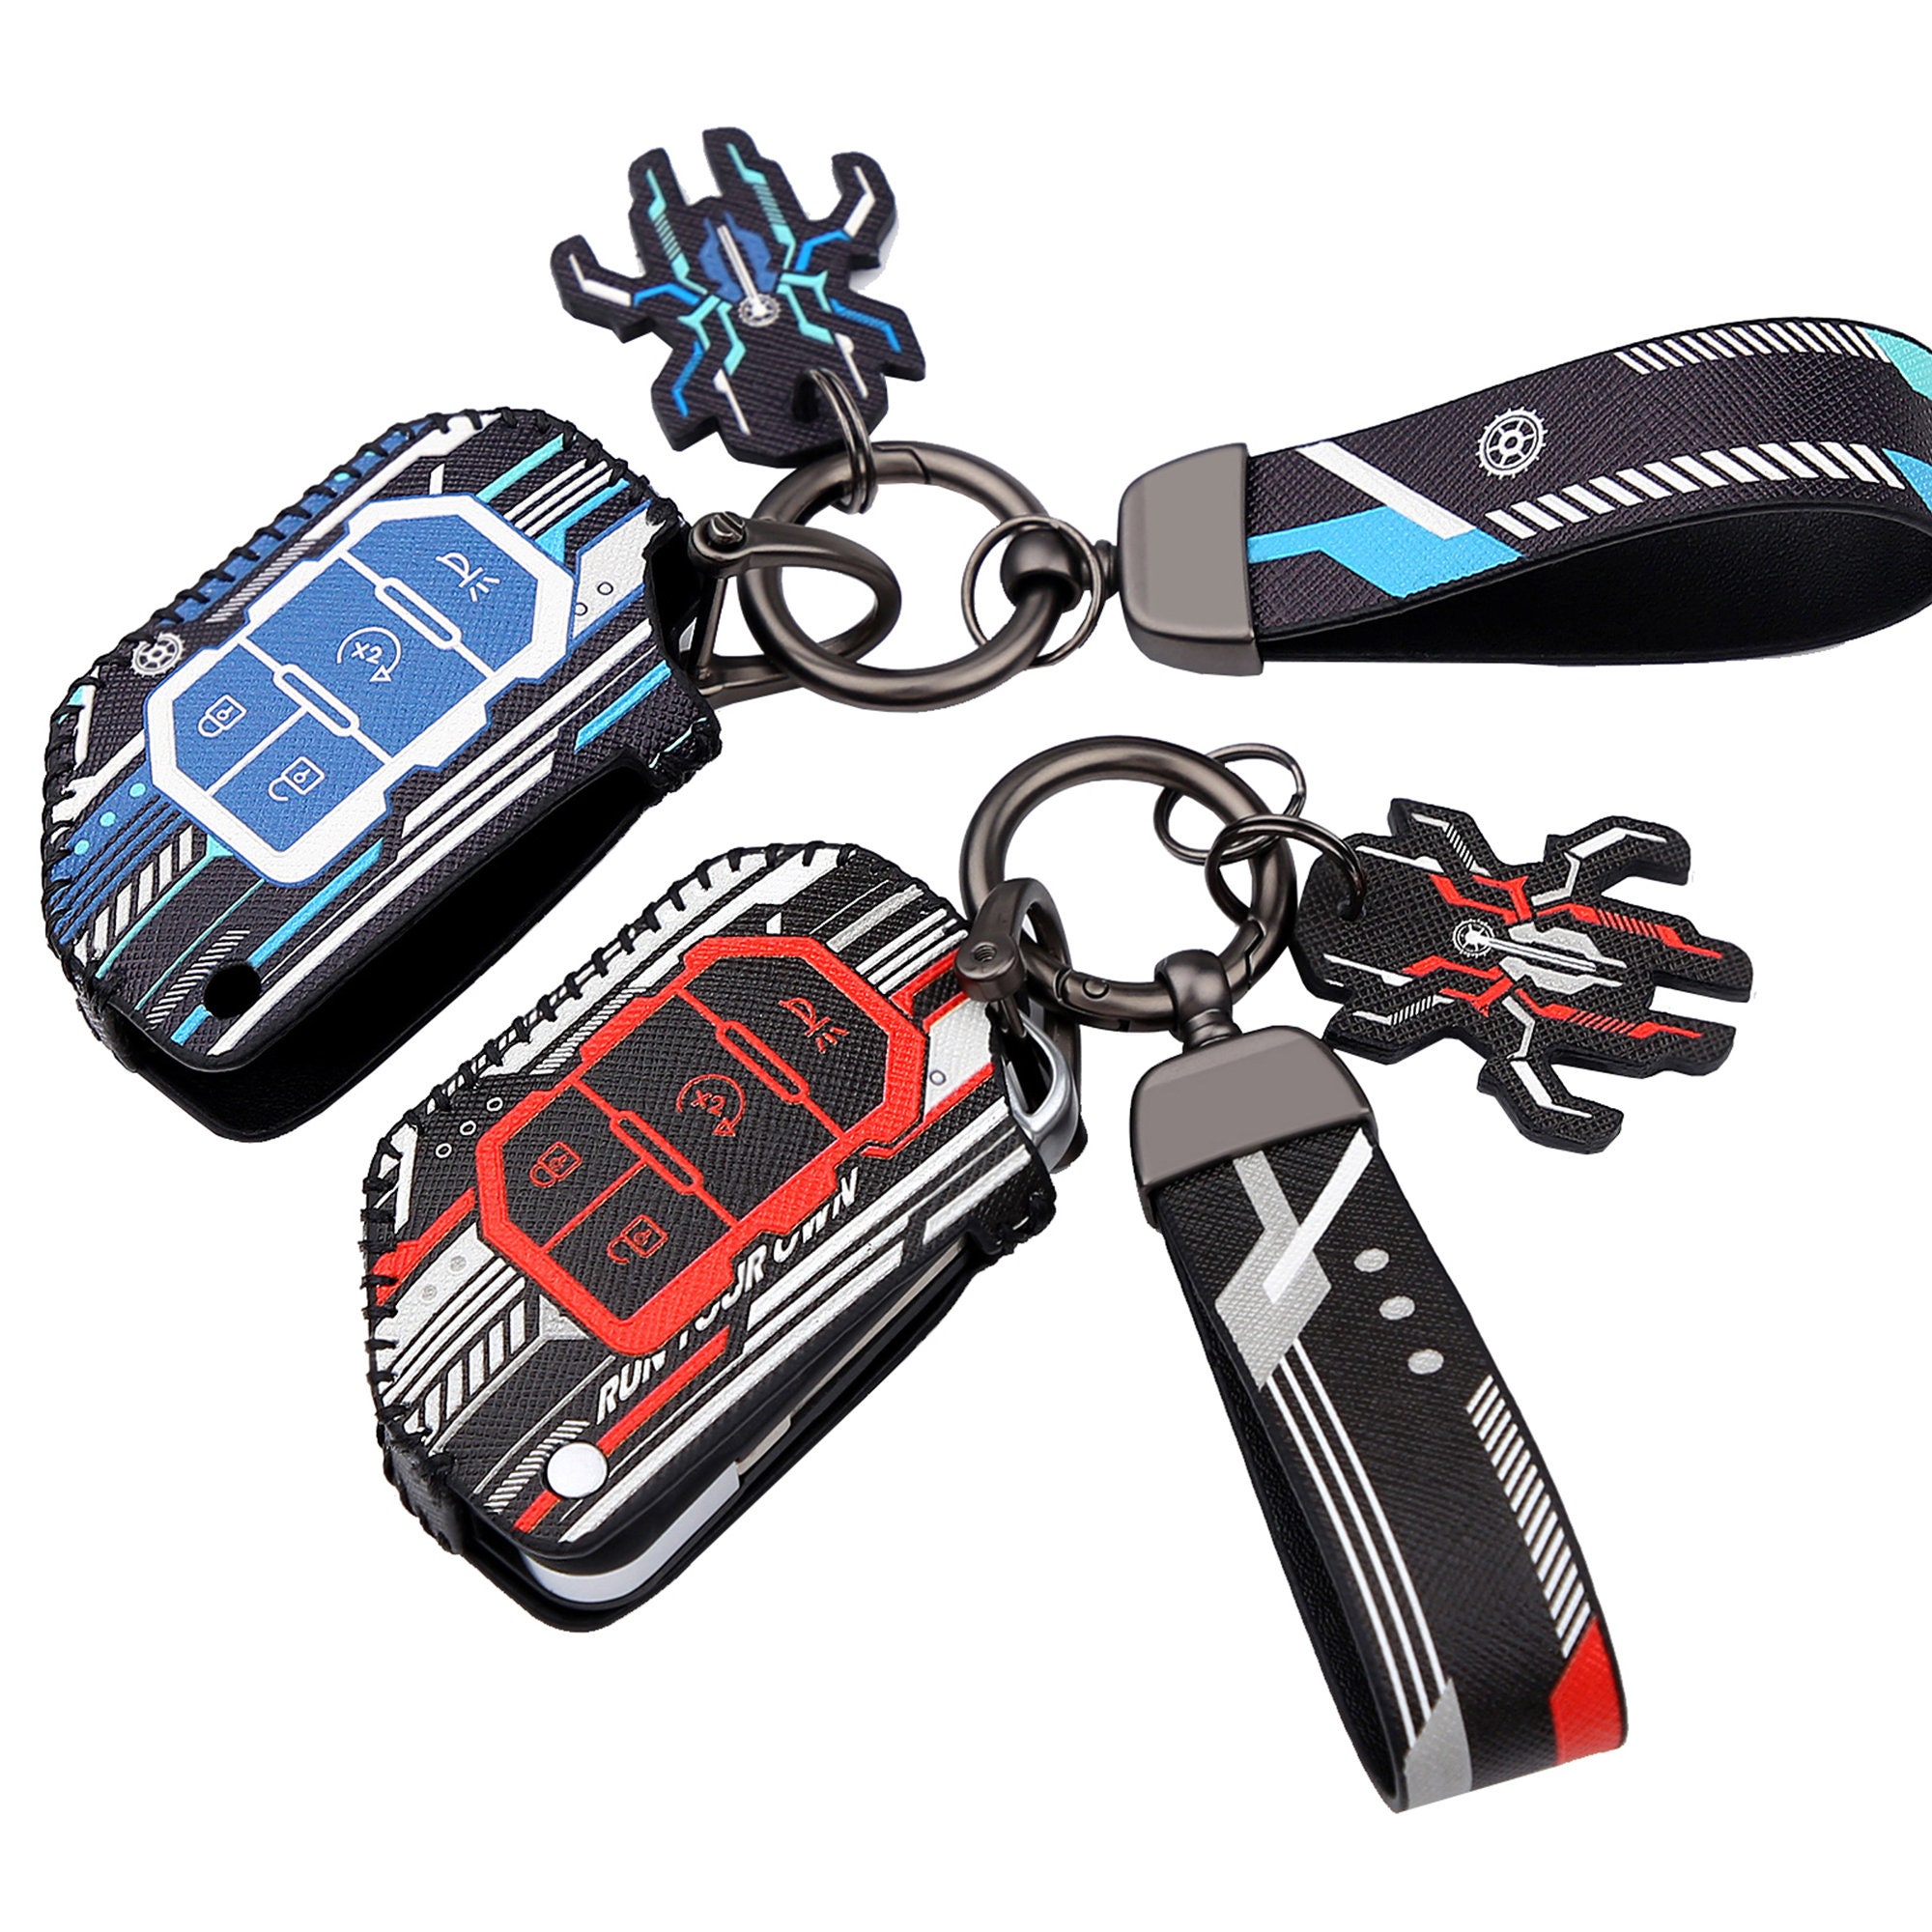 Buy Jeep Key Fob Cover Online In India -  India